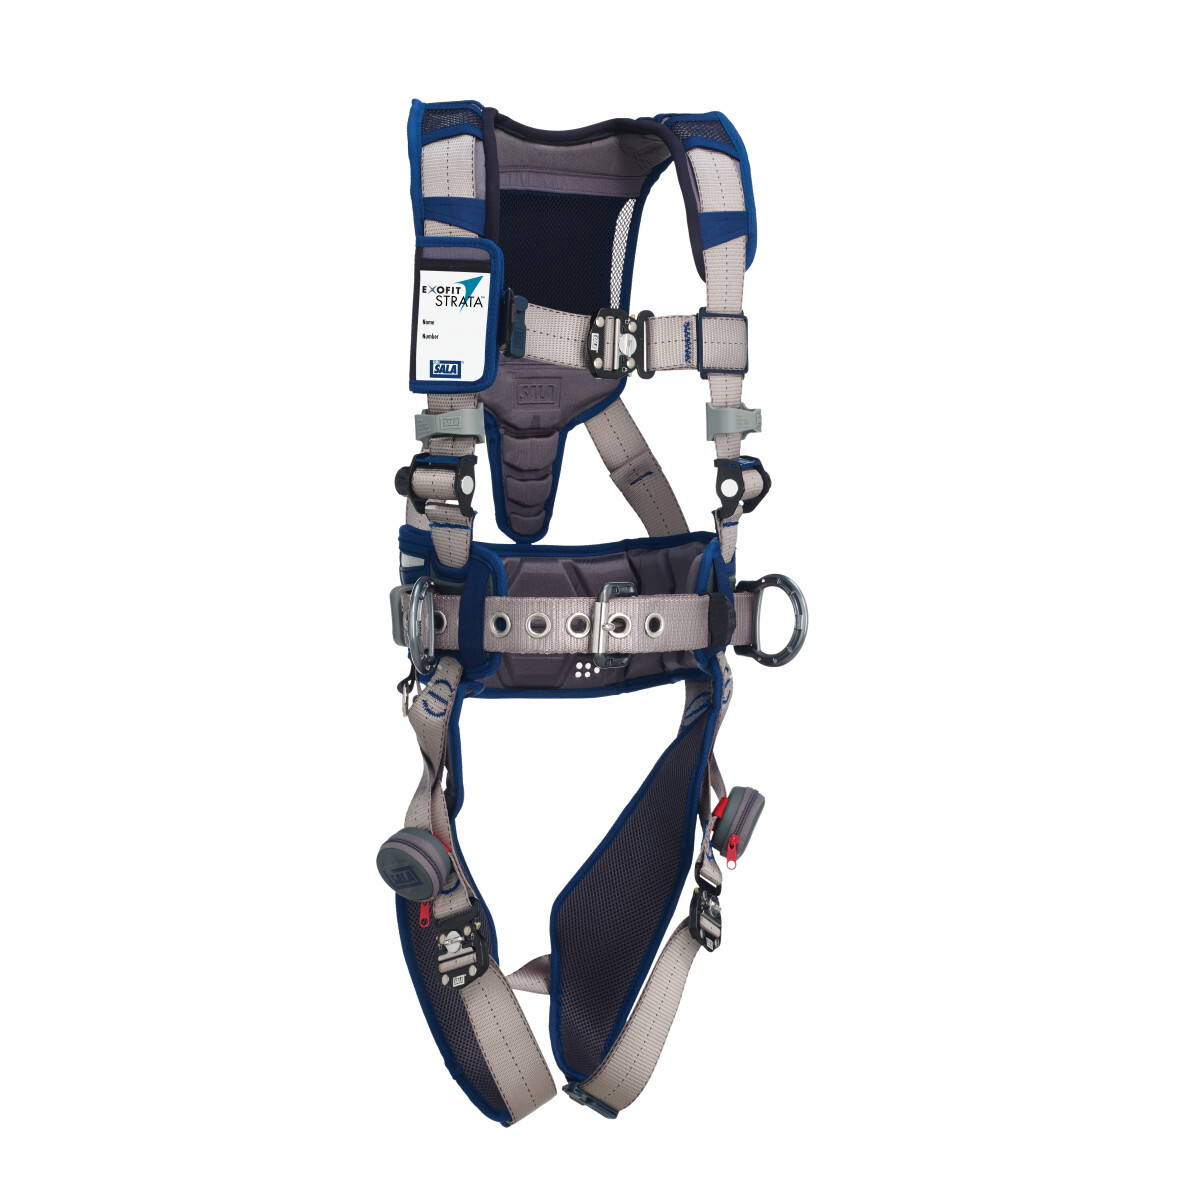 3M™ DBI-SALA® Medium ExoFit STRATA™ Construction Style Harness With Aluminum Back And Side D-rings, Duo-Lok™ Quik Connect Buckle